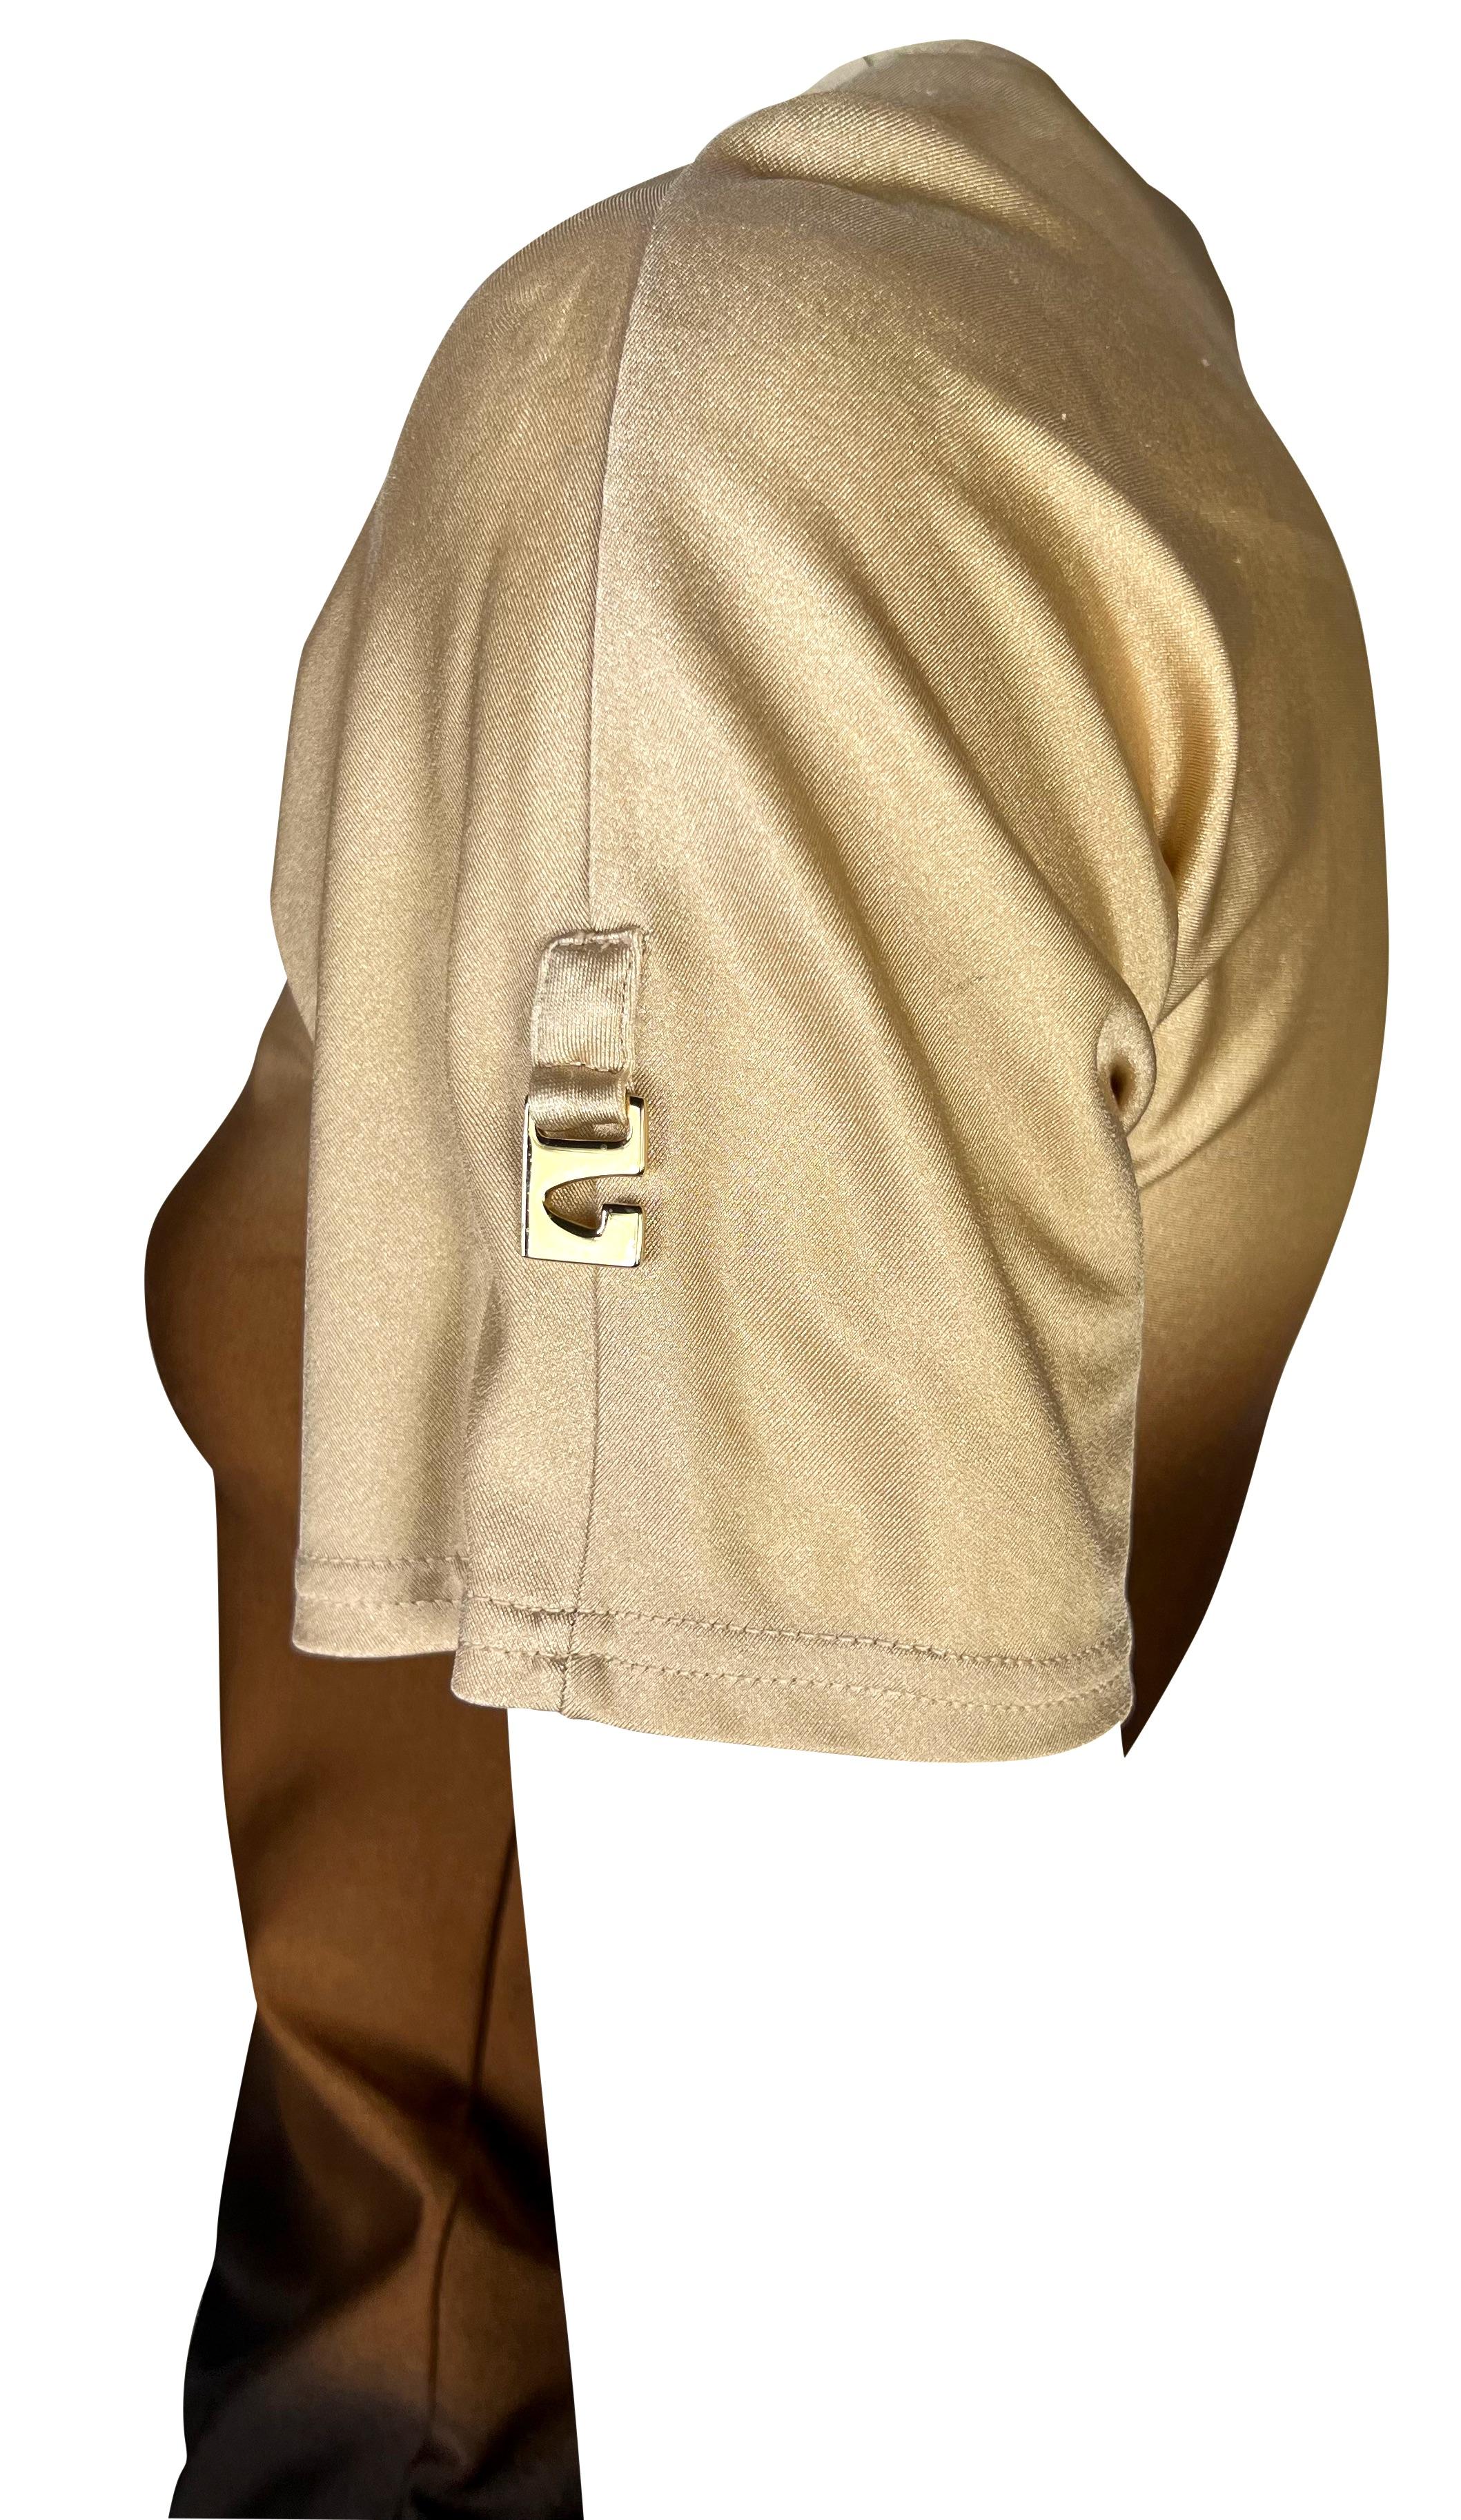 S/S 1997 Gucci by Tom Ford 'G' Medallion Beige Brown Ombré Stretch Swim Top In Good Condition In West Hollywood, CA